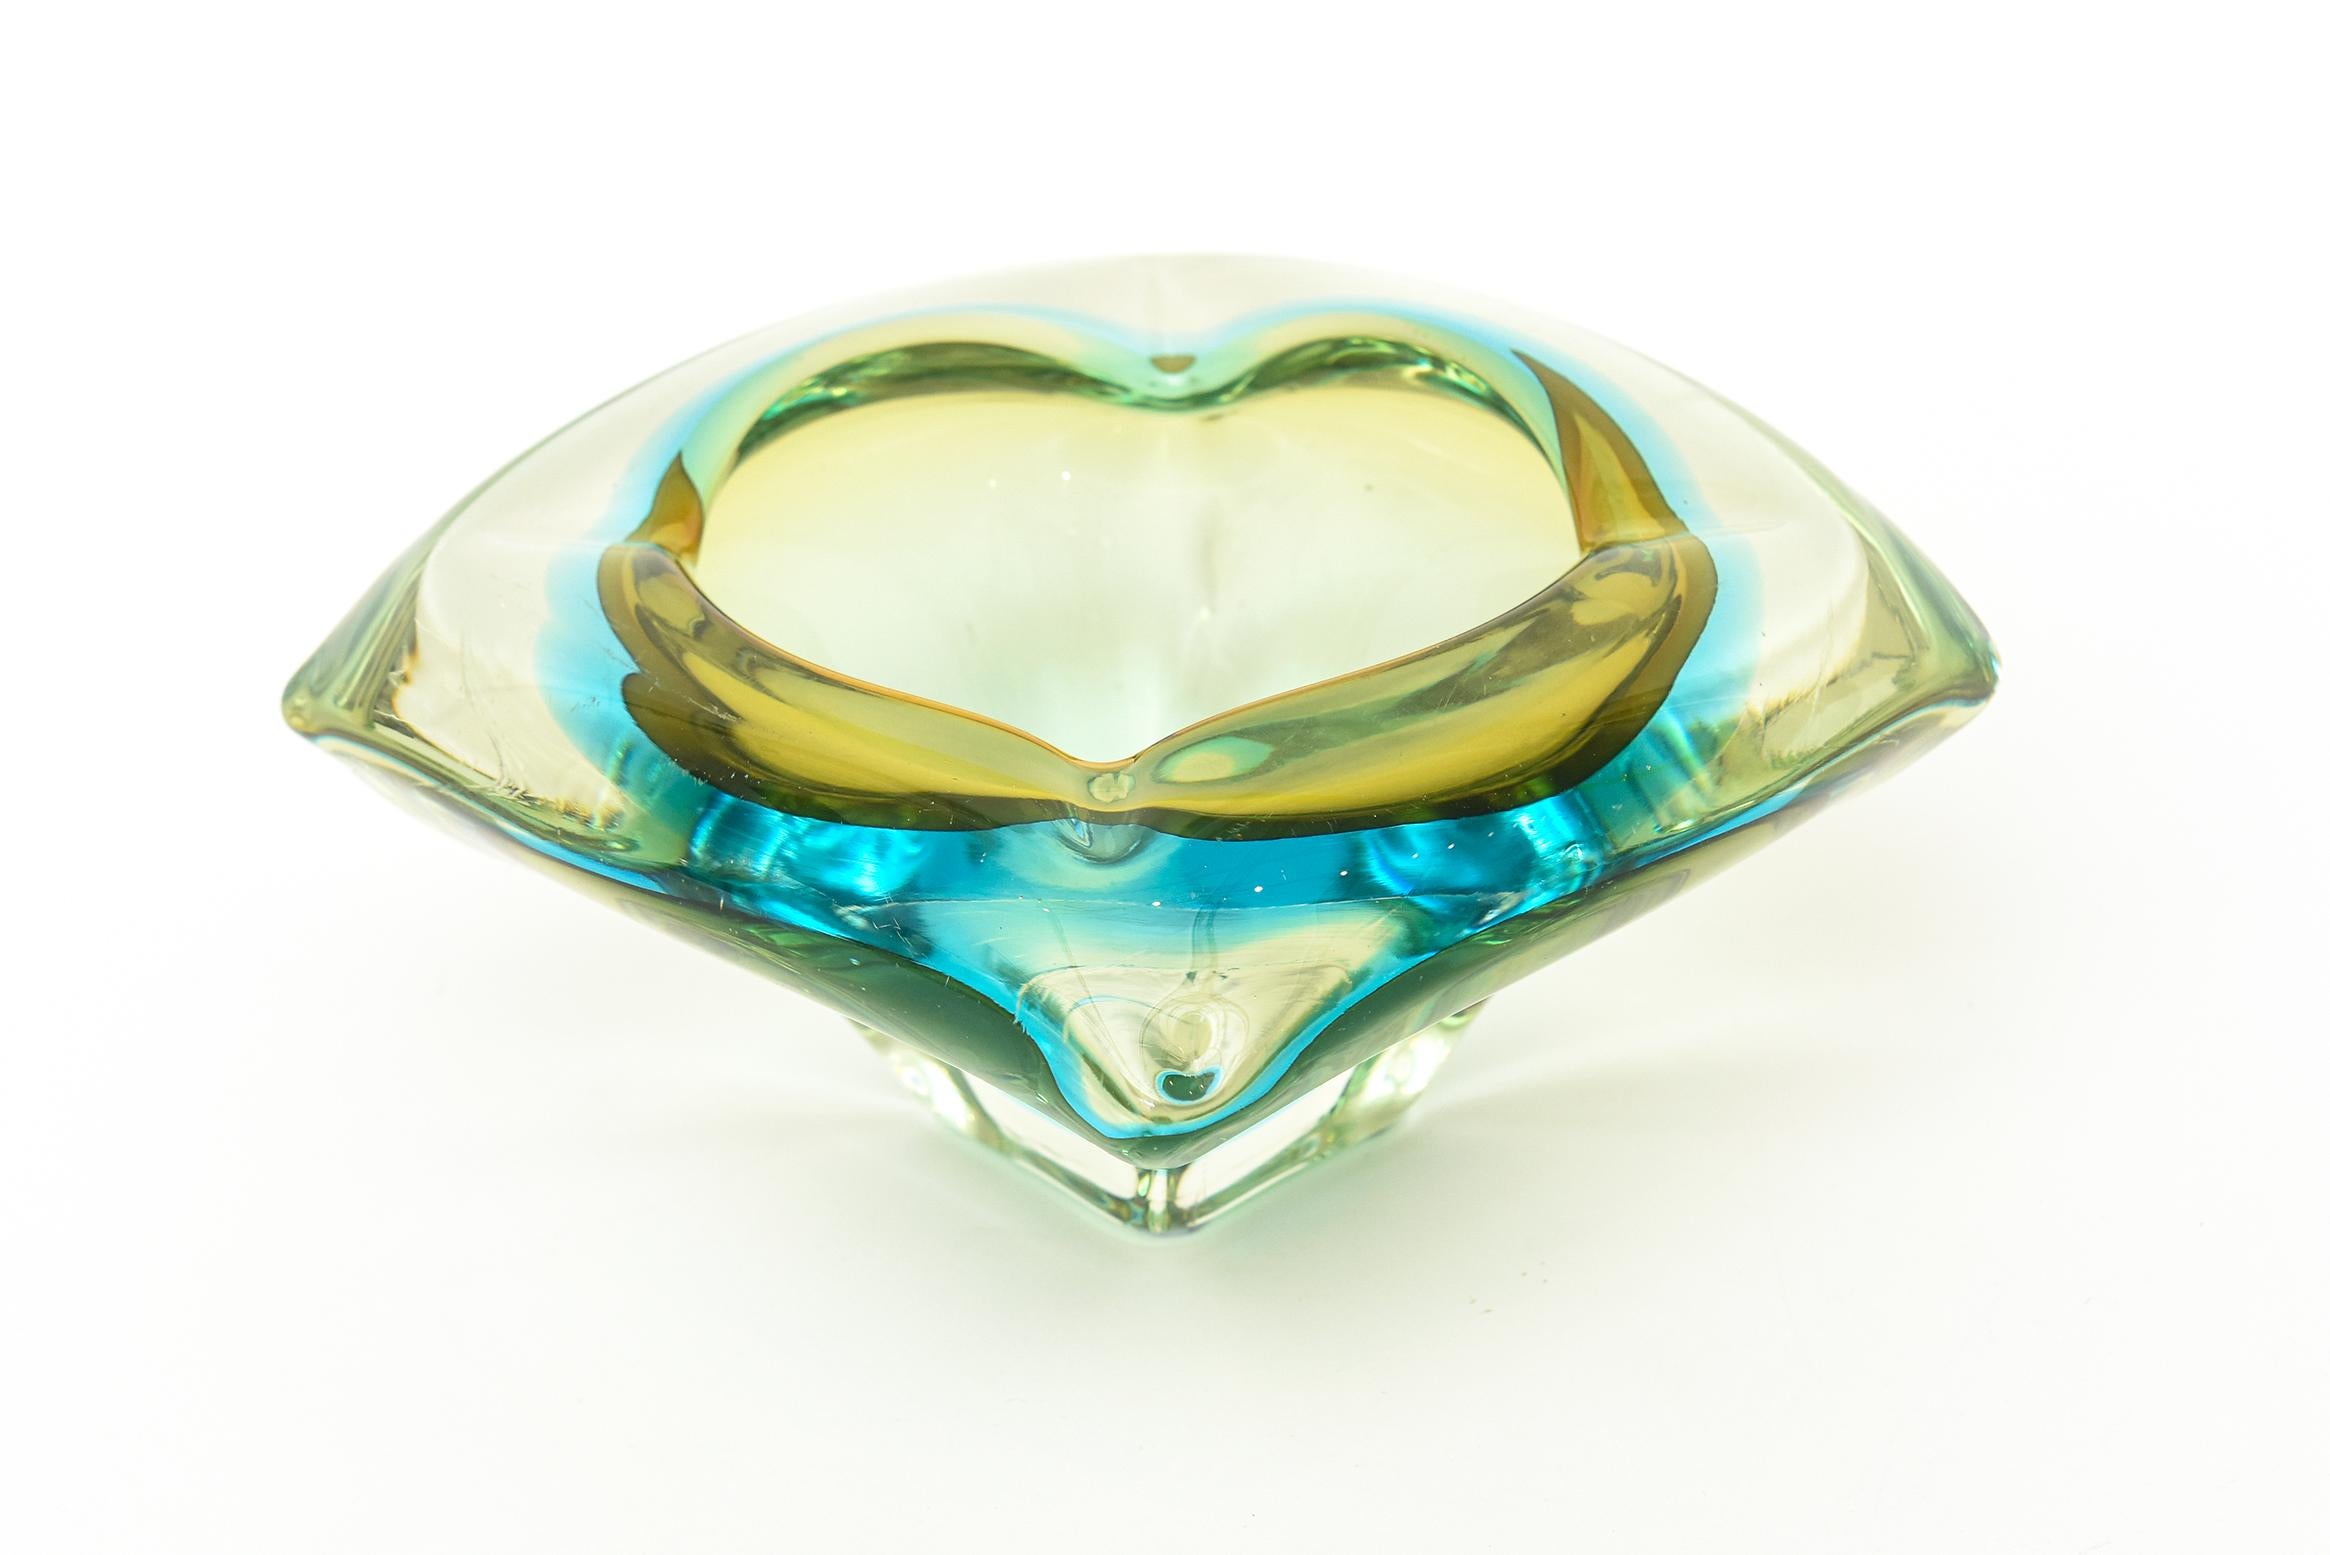 This large chunky vintage Italian Murano glass bowl by Flavio Poli is layers of luscious sommerso glass of turquoise and shades of greens with a hint of amber depending on the play of light. It has 4 very small indentations on all the sides. Perhaps